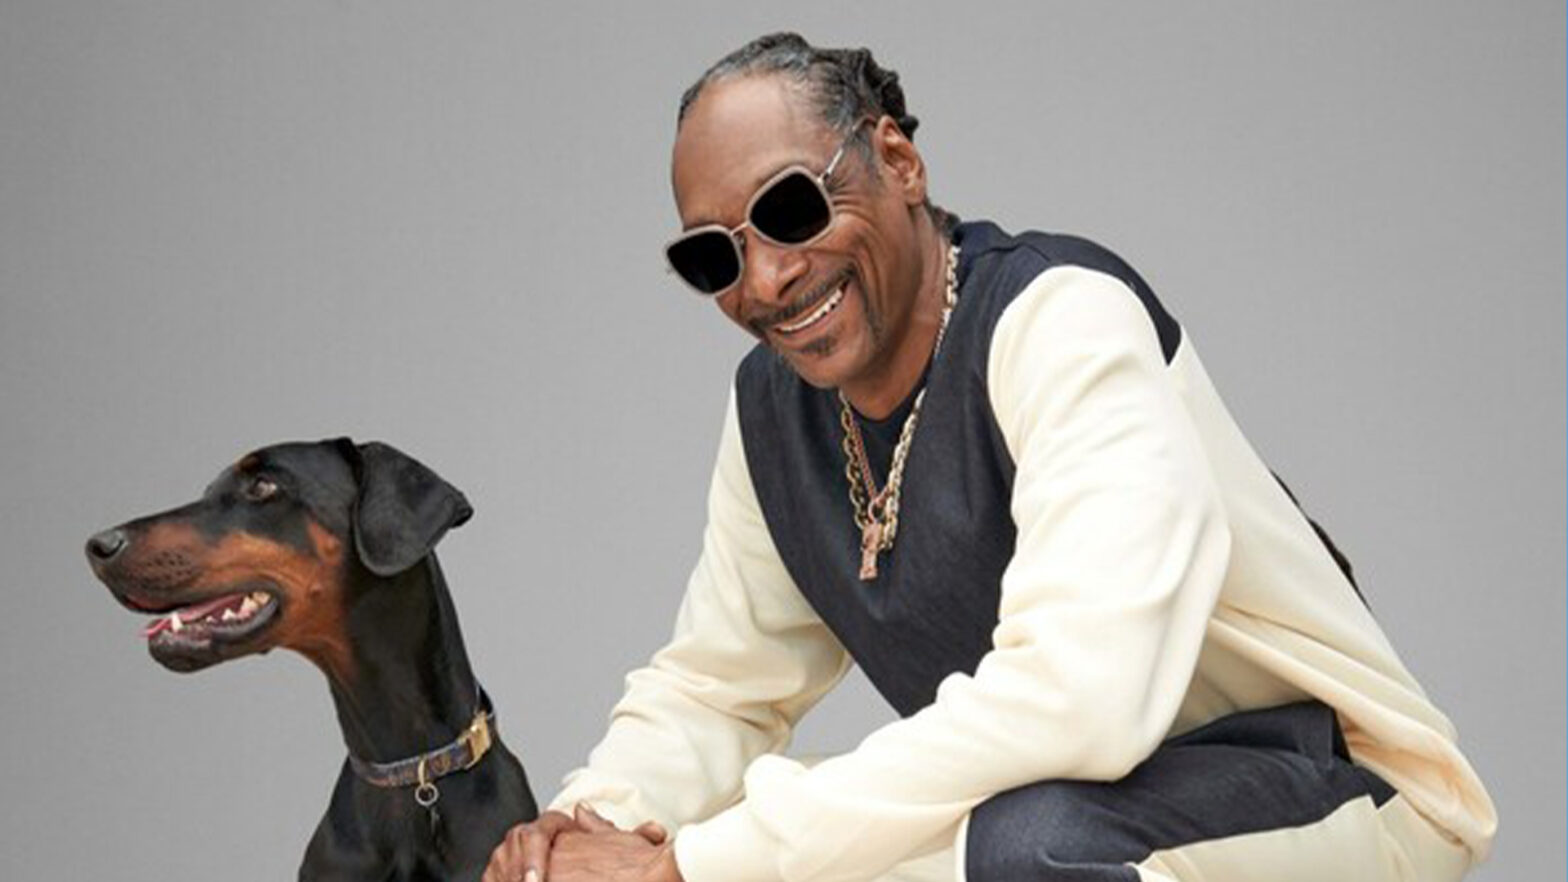 For His Next Business Move, Snoop Dogg's Set To Release His Pet Products At Petco